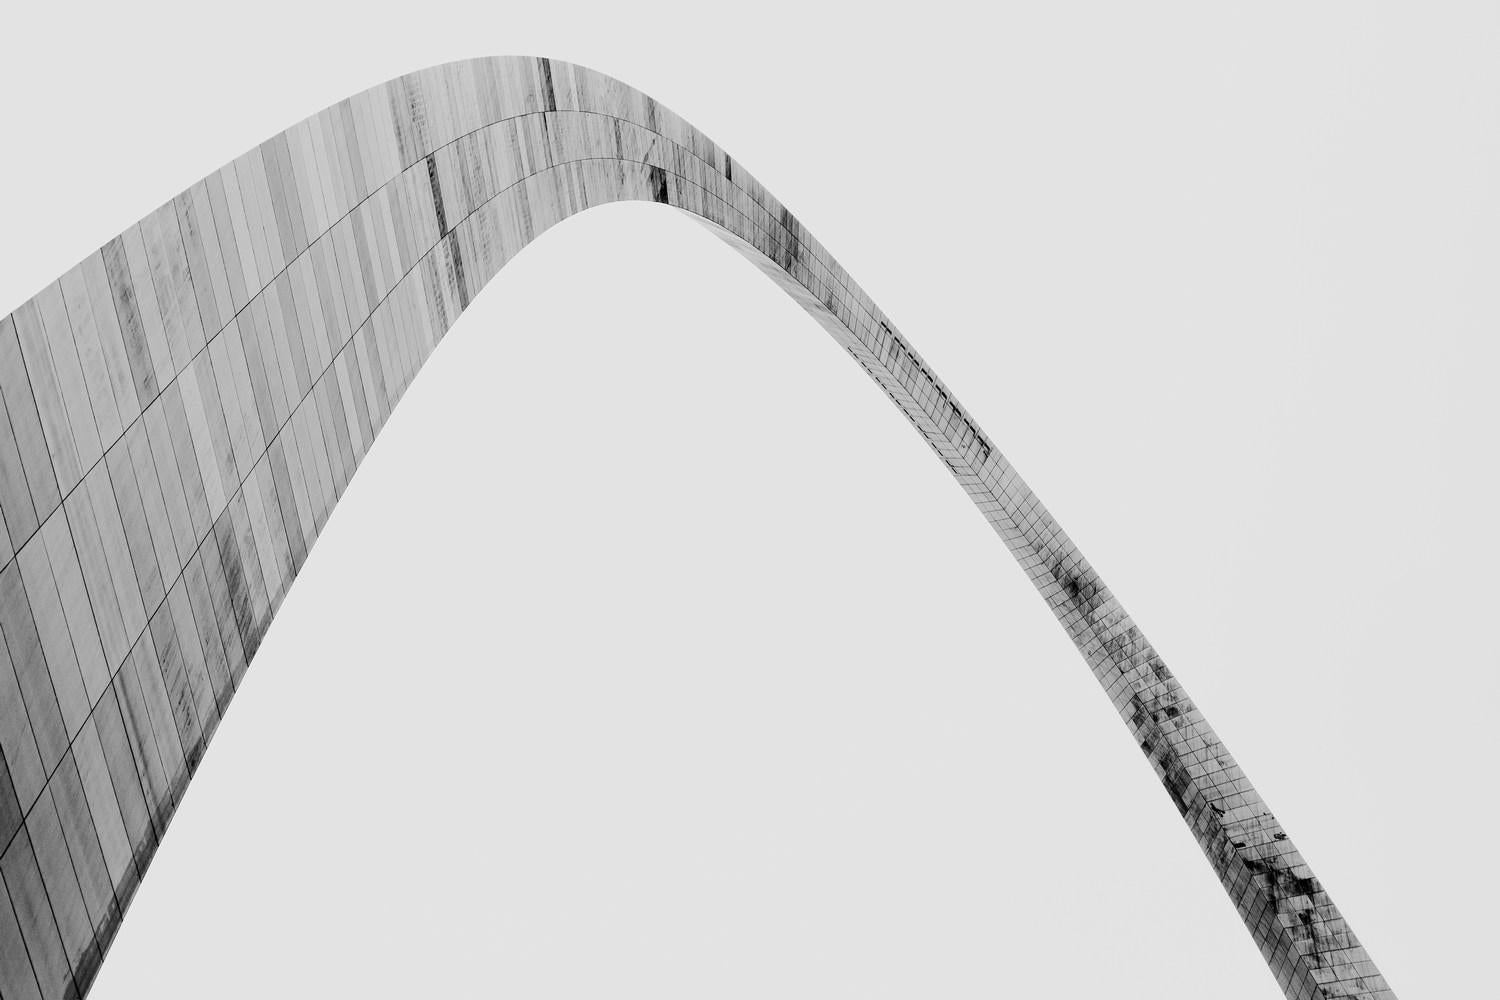 David Pugh Black and White Photograph - “Untitled” (from Arch Series)